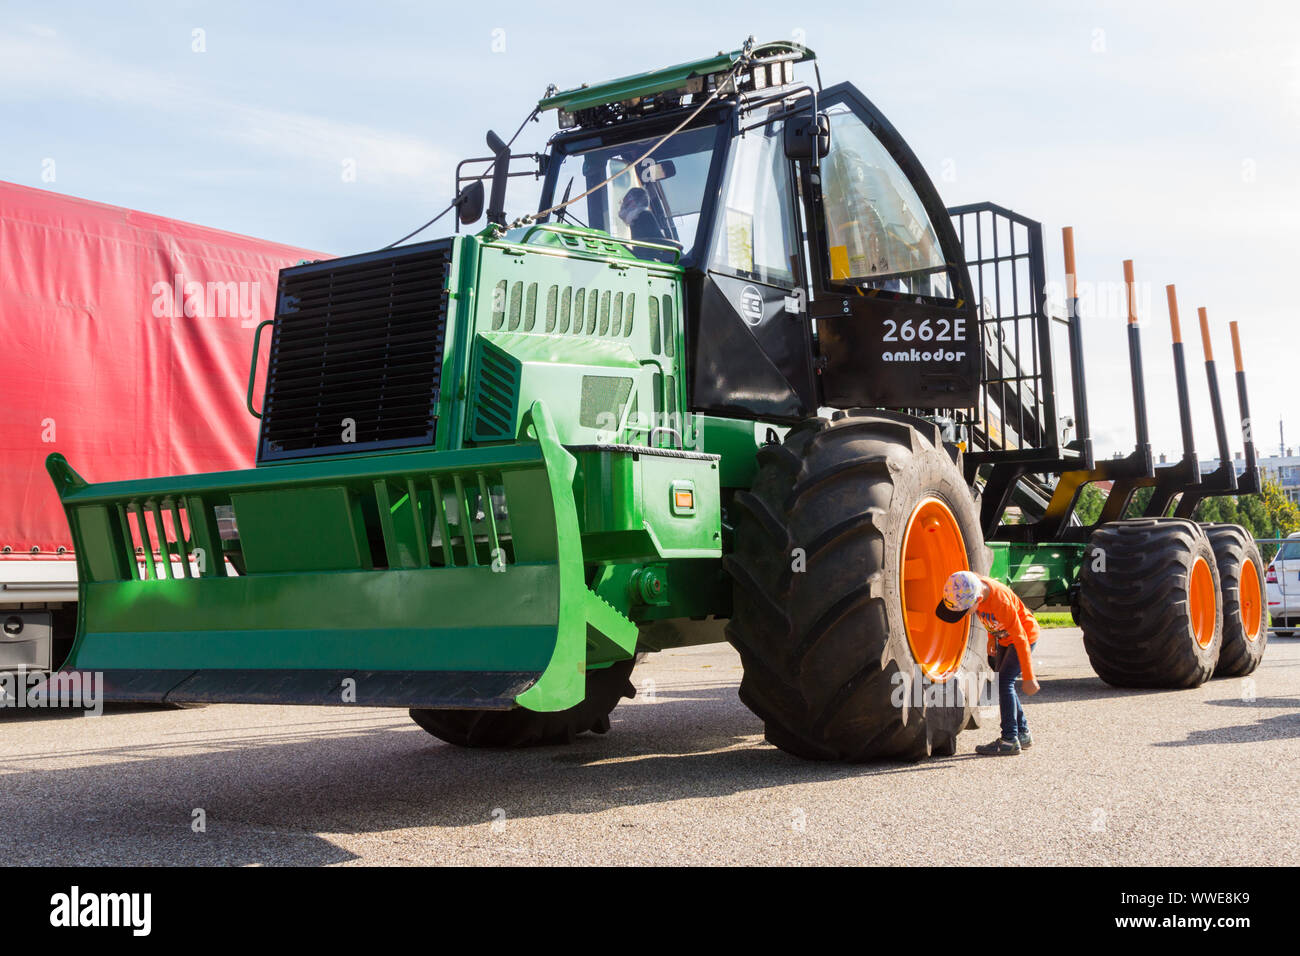 Amkodor 2662E forwarder at innoLignum Sopron Timber Industry and Forestry Trade Fair, Sopron, Hungary Stock Photo